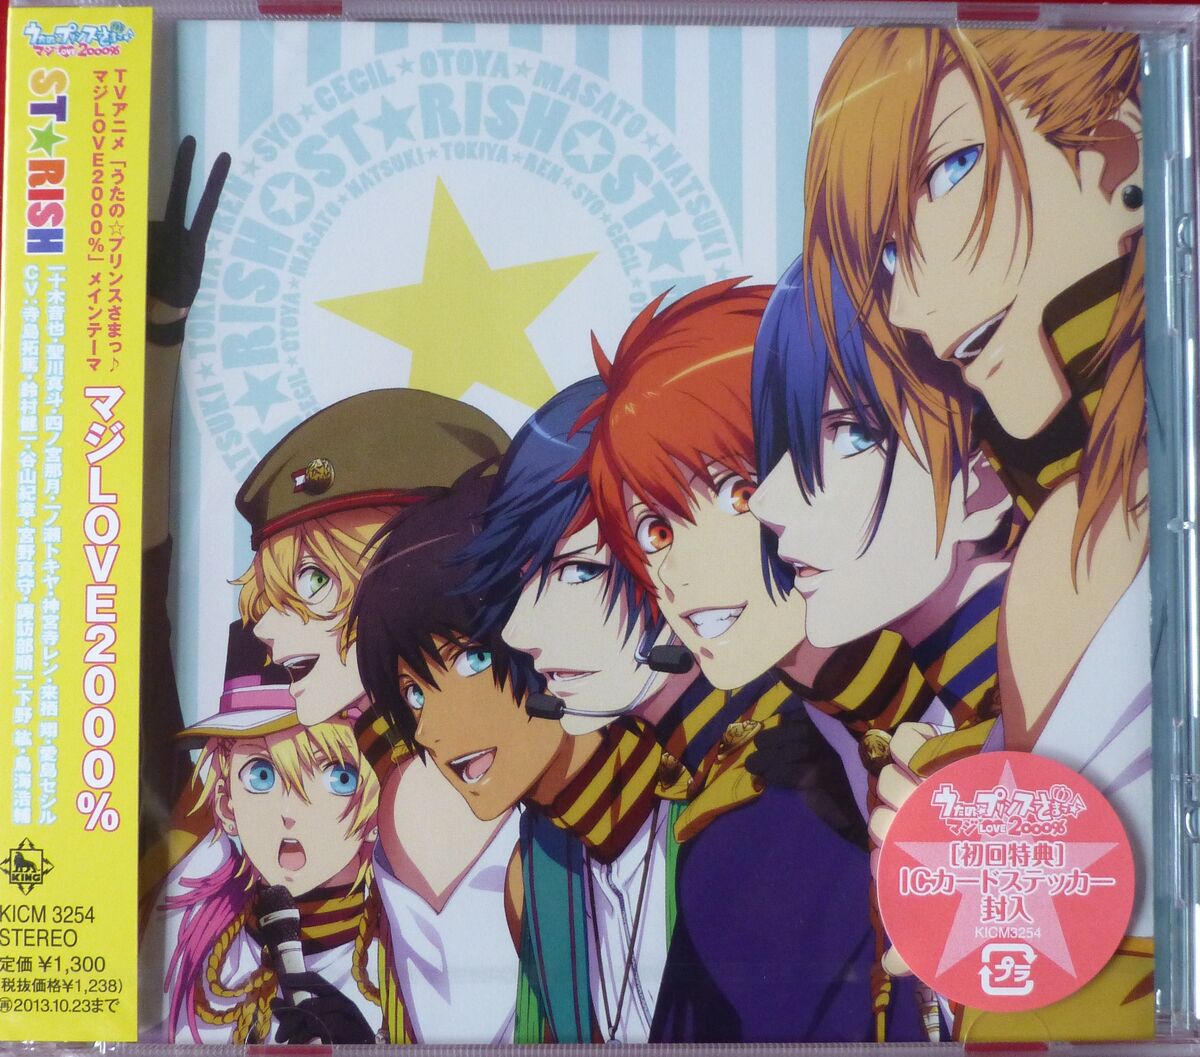 CD/DVD Cover and Booklet Scans | Uta no Prince-sama Wiki | Fandom